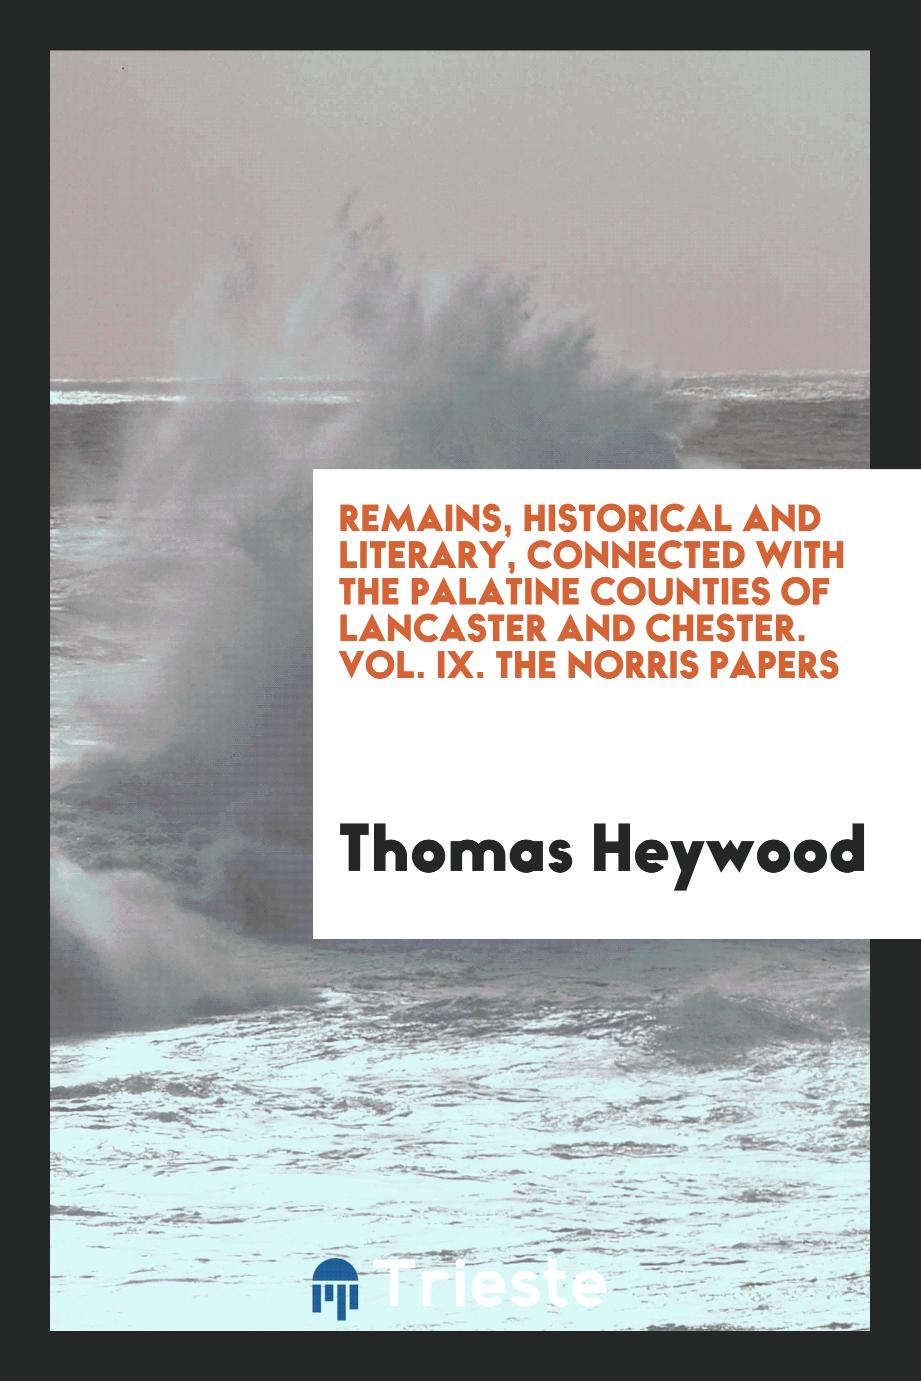 Remains, Historical and Literary, Connected with the Palatine Counties of Lancaster and Chester. Vol. IX. The Norris Papers